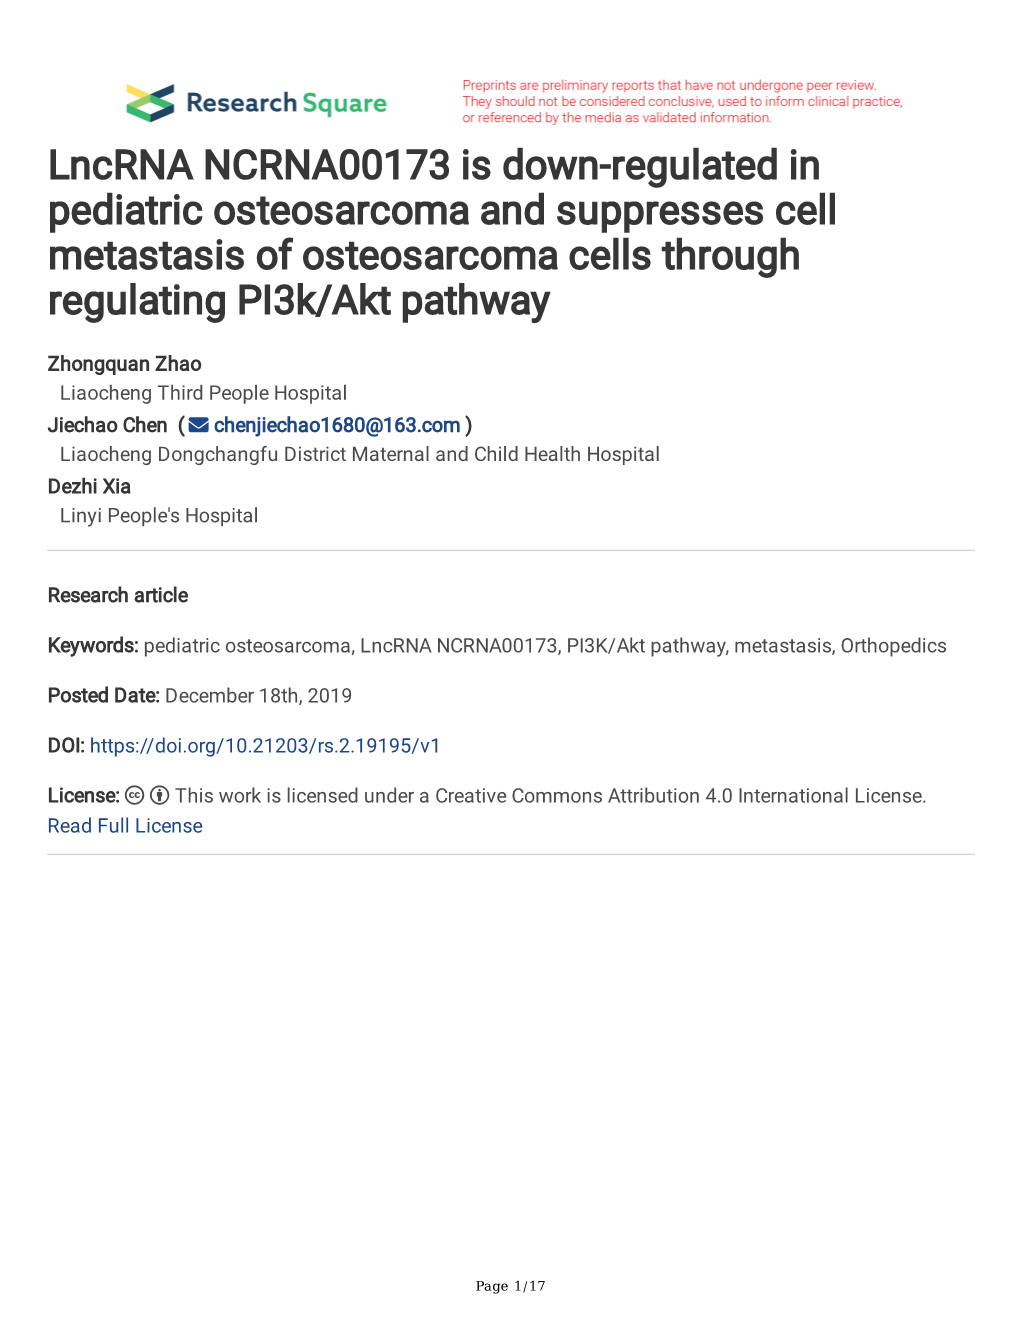 Lncrna NCRNA00173 Is Down-Regulated in Pediatric Osteosarcoma and Suppresses Cell Metastasis of Osteosarcoma Cells Through Regulating Pi3k/Akt Pathway